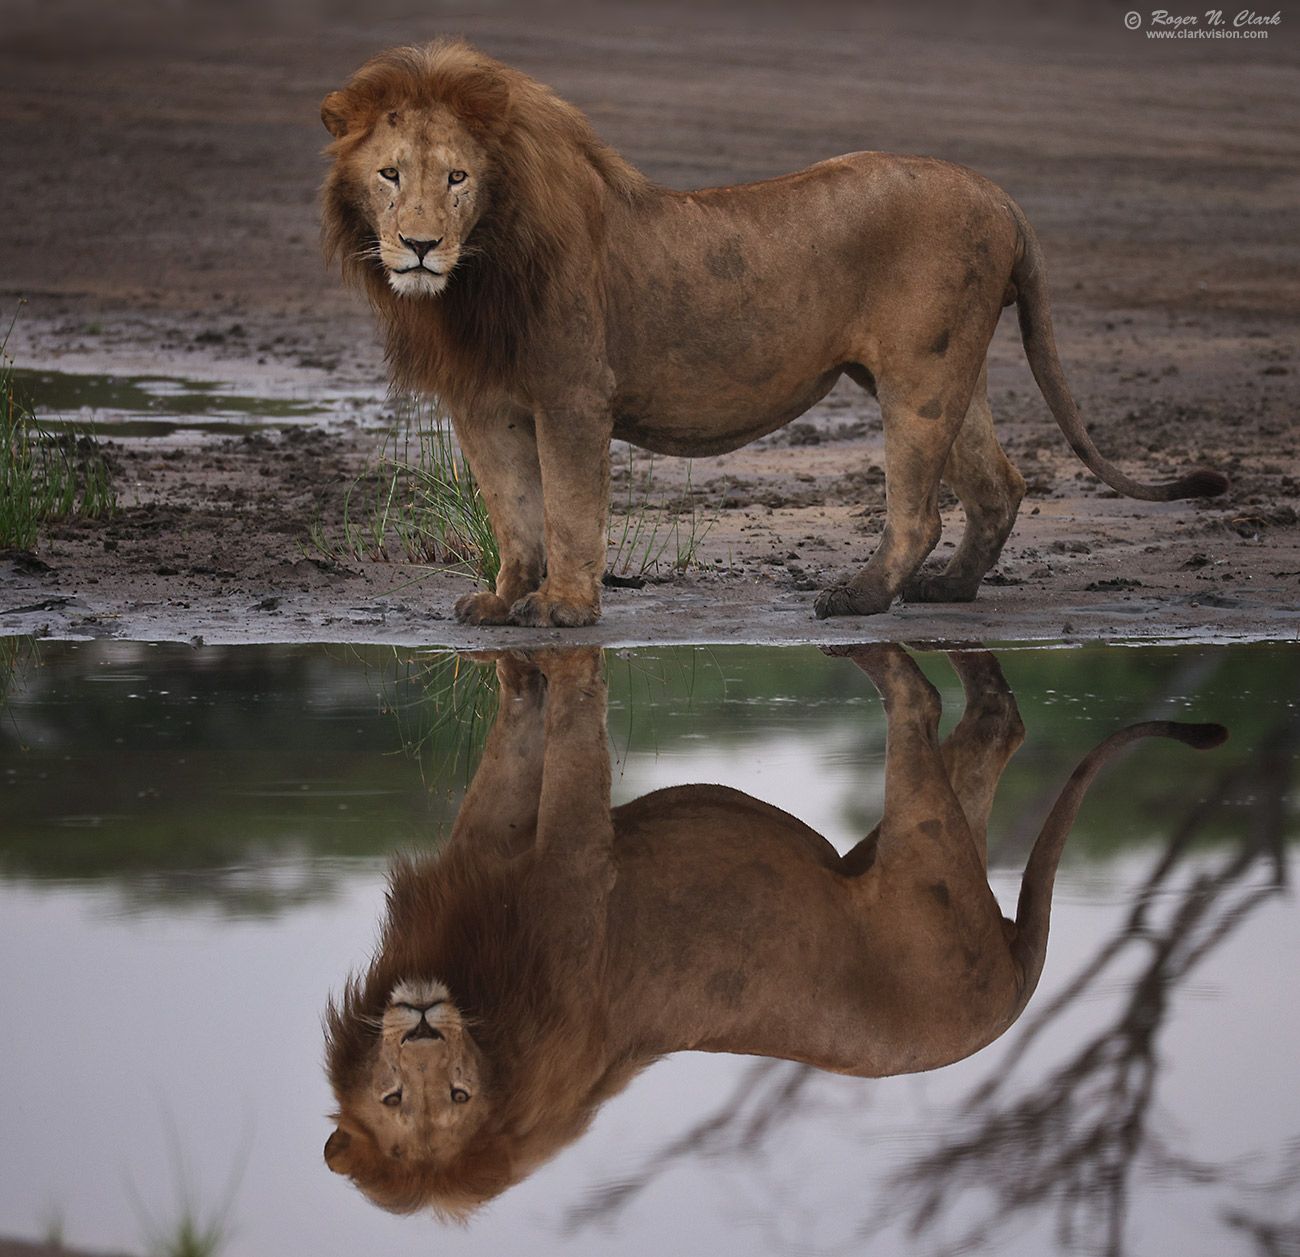 image male-lion-reflection-c02-19-2024-4C3A1231-c-1300s.jpg is Copyrighted by Roger N. Clark, www.clarkvision.com